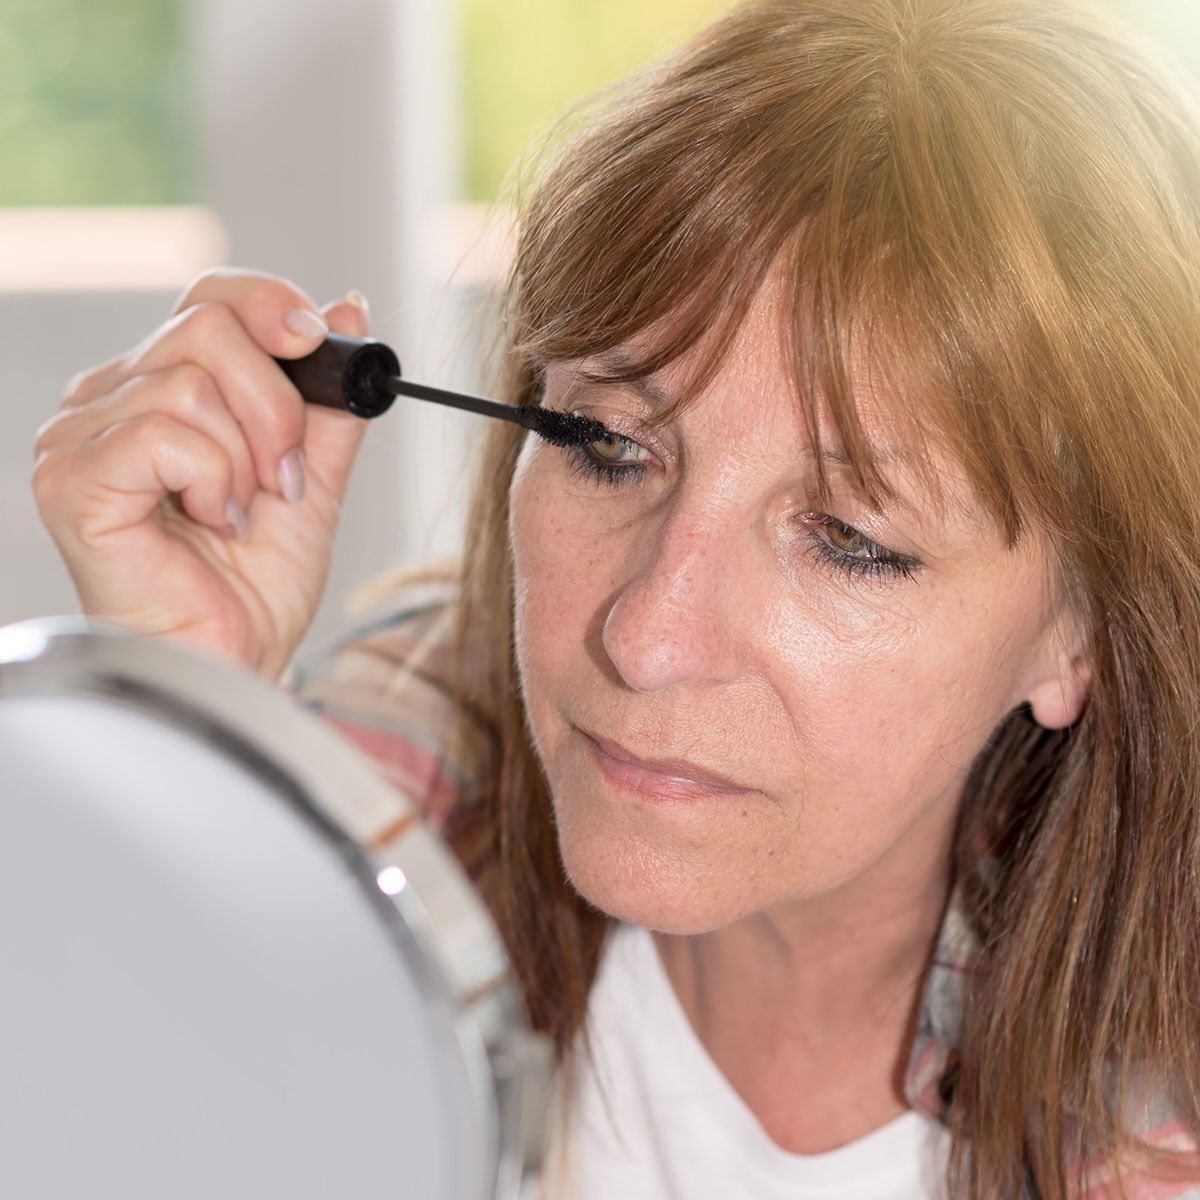 How to do eye makeup after 50: tips from professionals